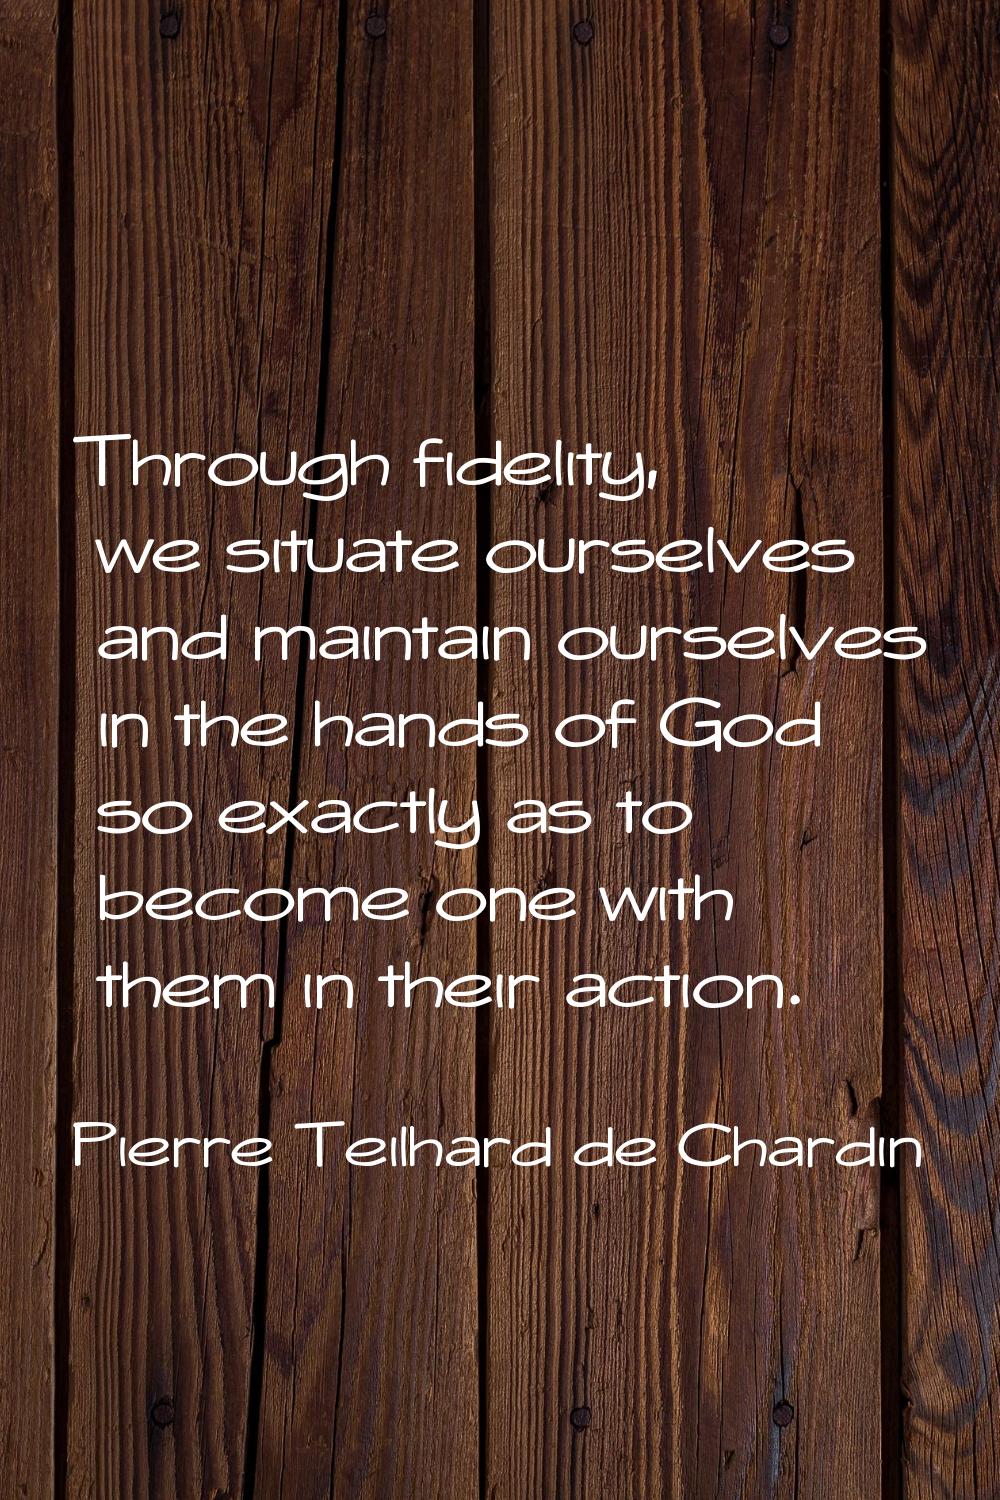 Through fidelity, we situate ourselves and maintain ourselves in the hands of God so exactly as to 